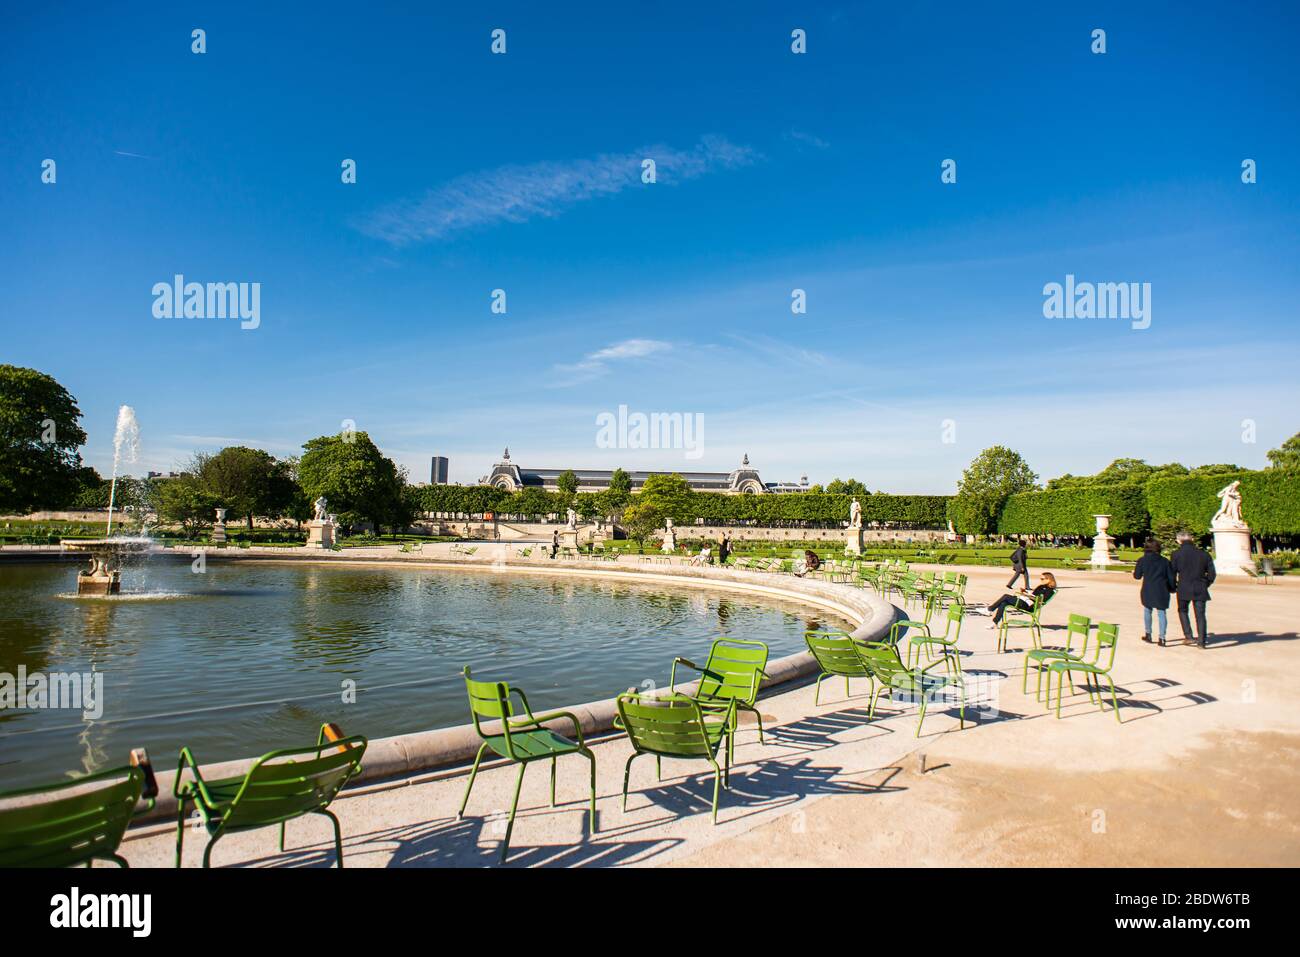 Paris. France - May 15, 2019: People Sits and Relaxing on a Chairs next Fountain in Tuileries Garden. Stock Photo